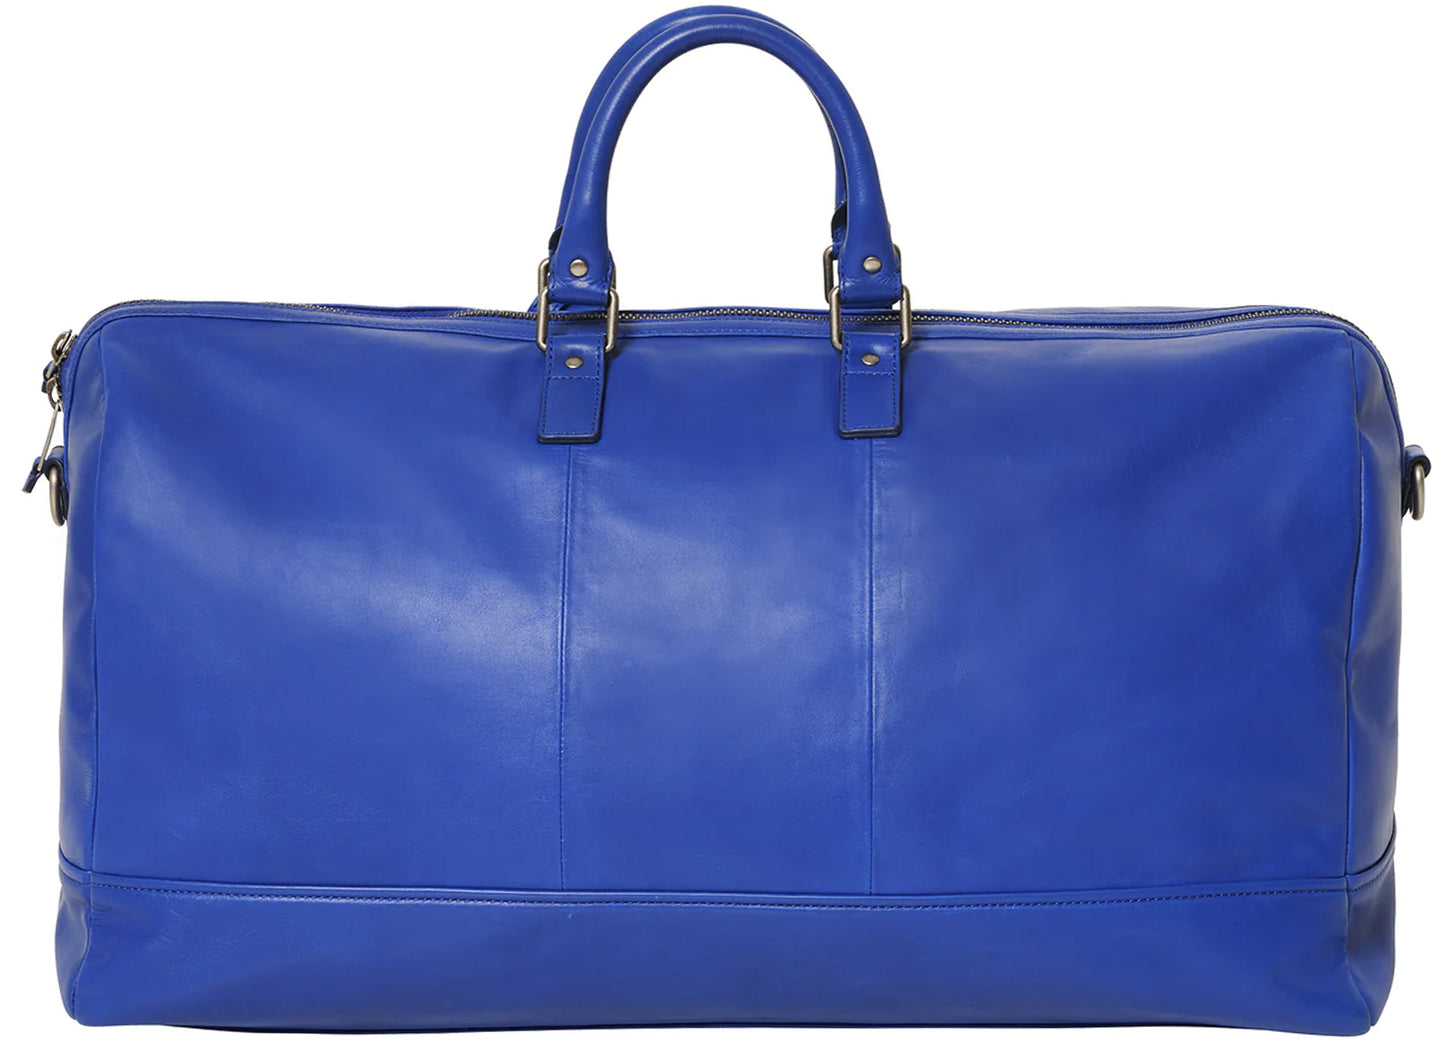 Avirex Icon Duffle Bag in Blue